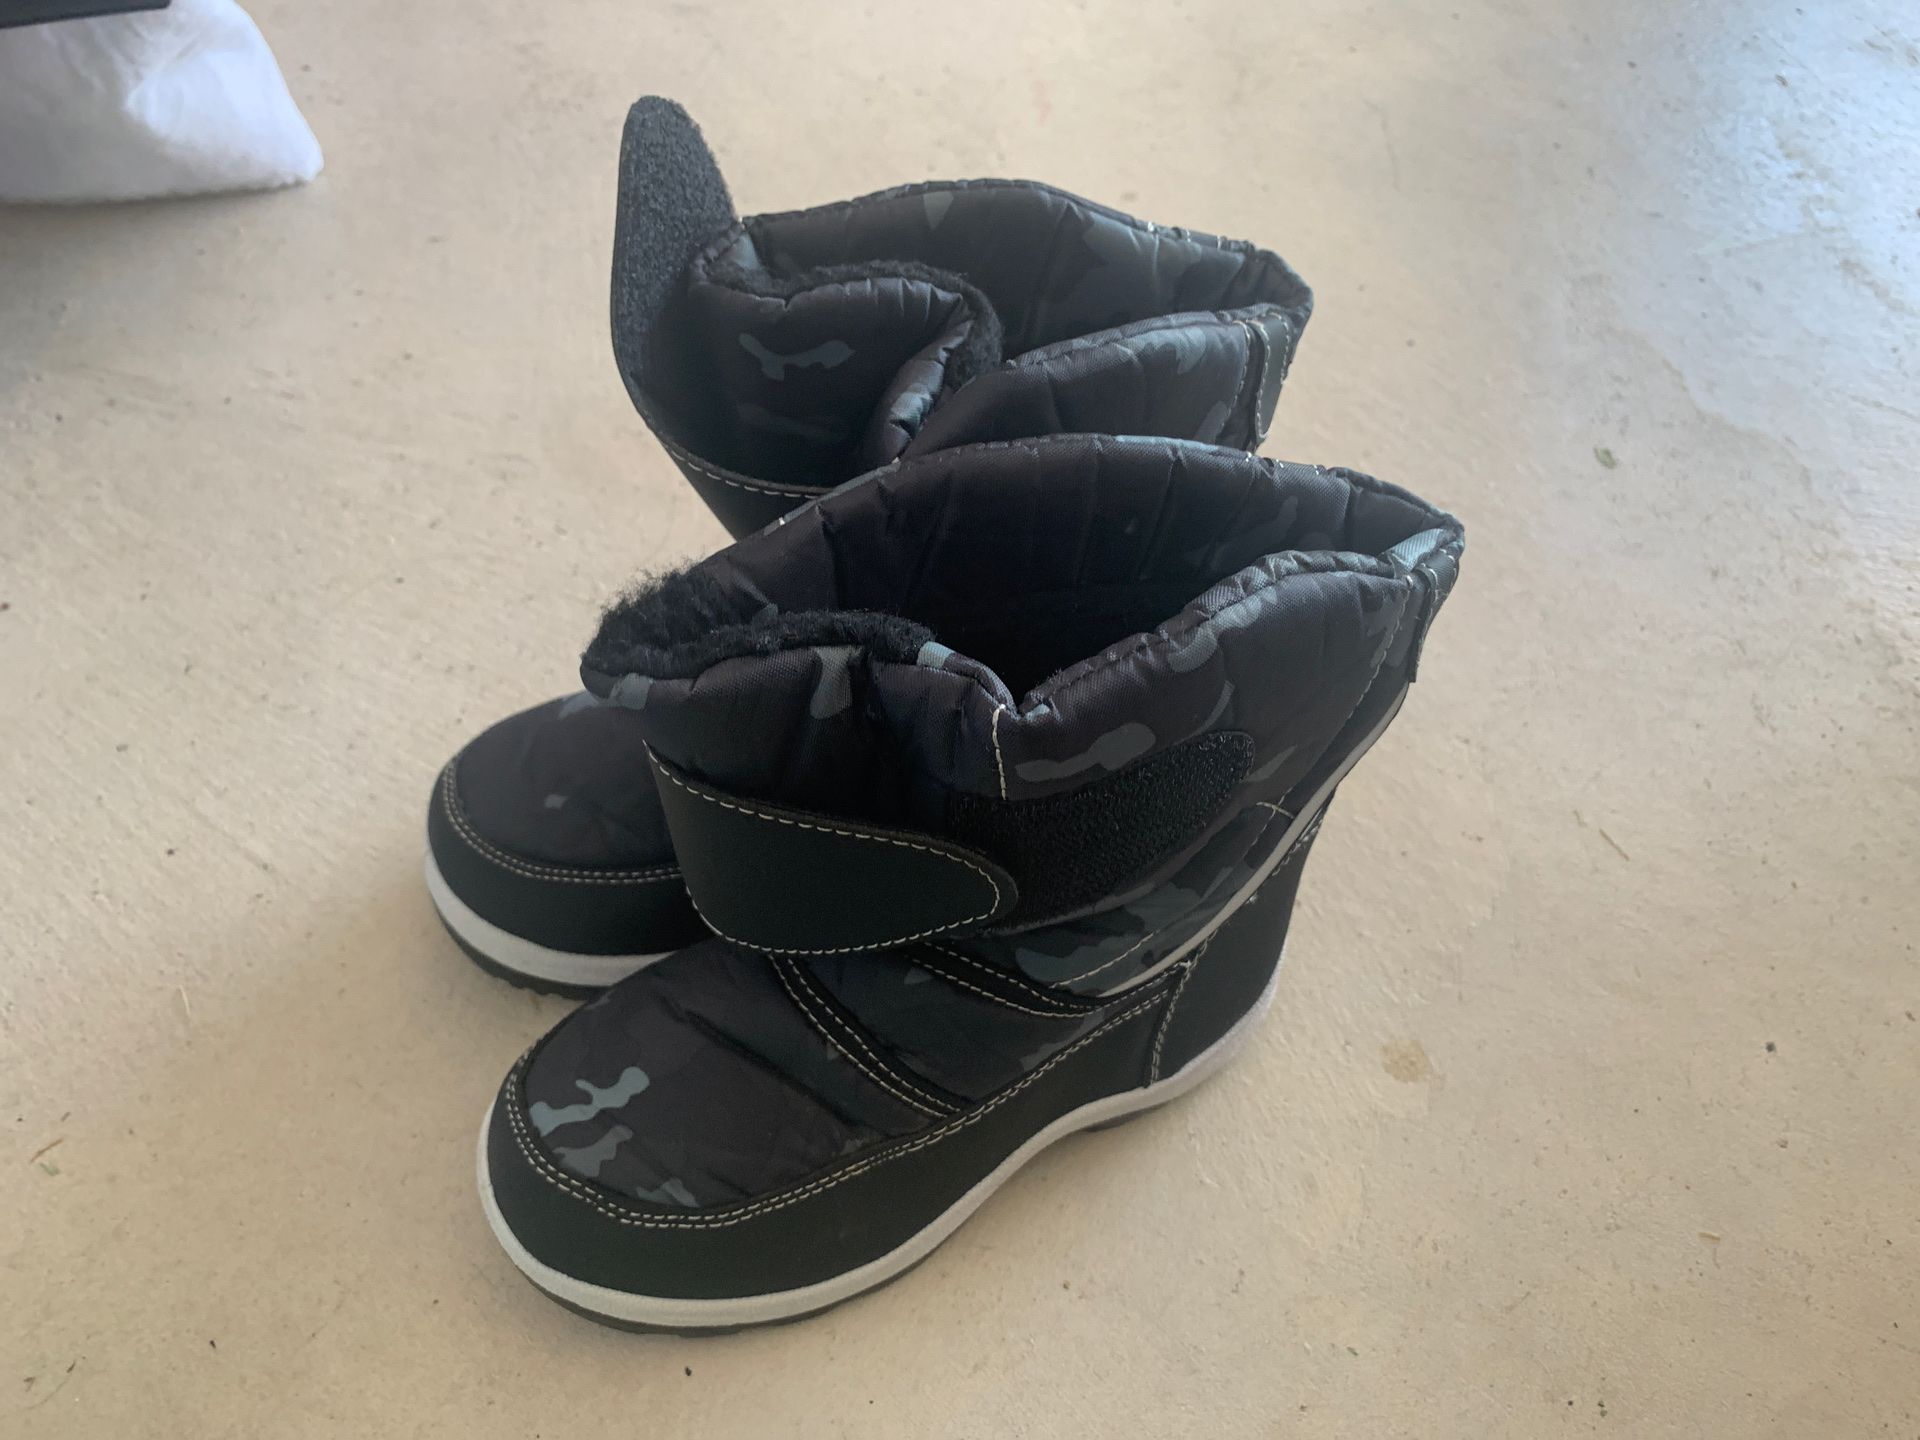 Snow Boots for kid size 1